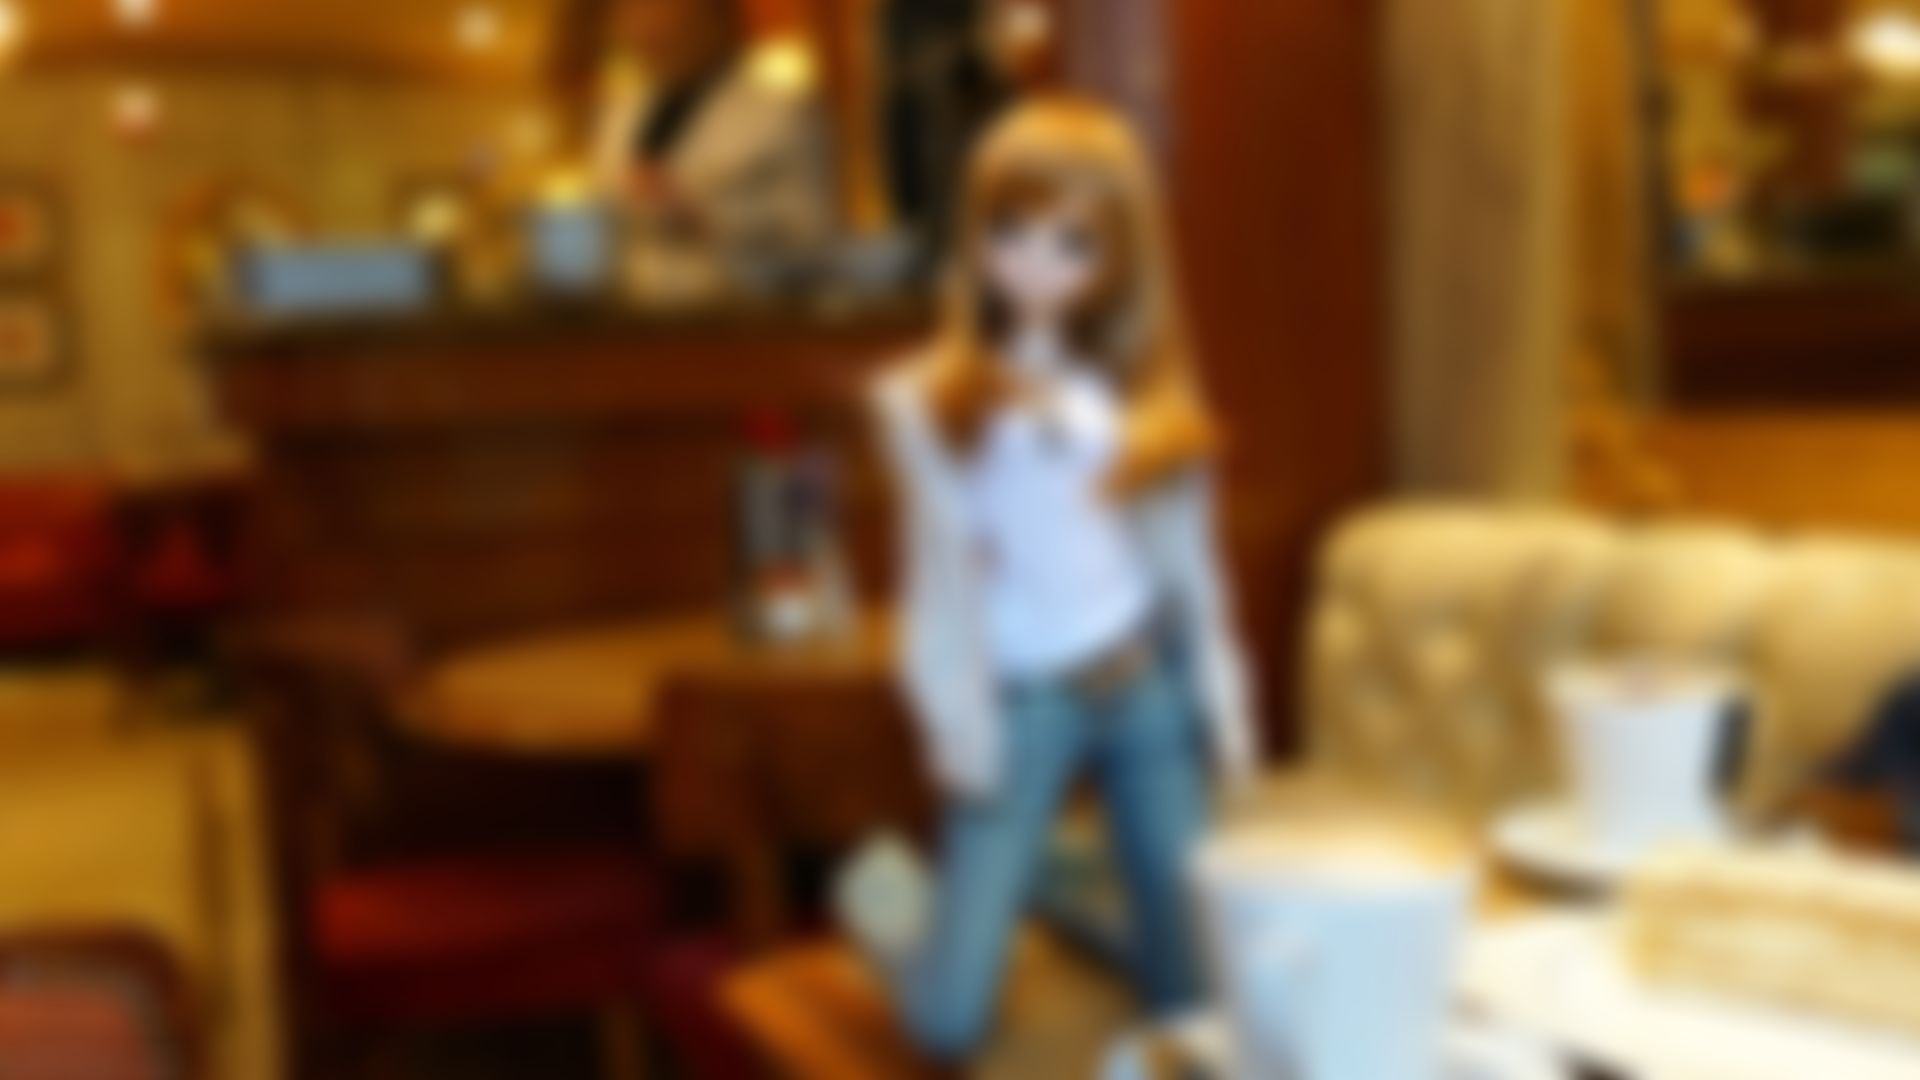 Mirai stopping at a cafe in Soho London